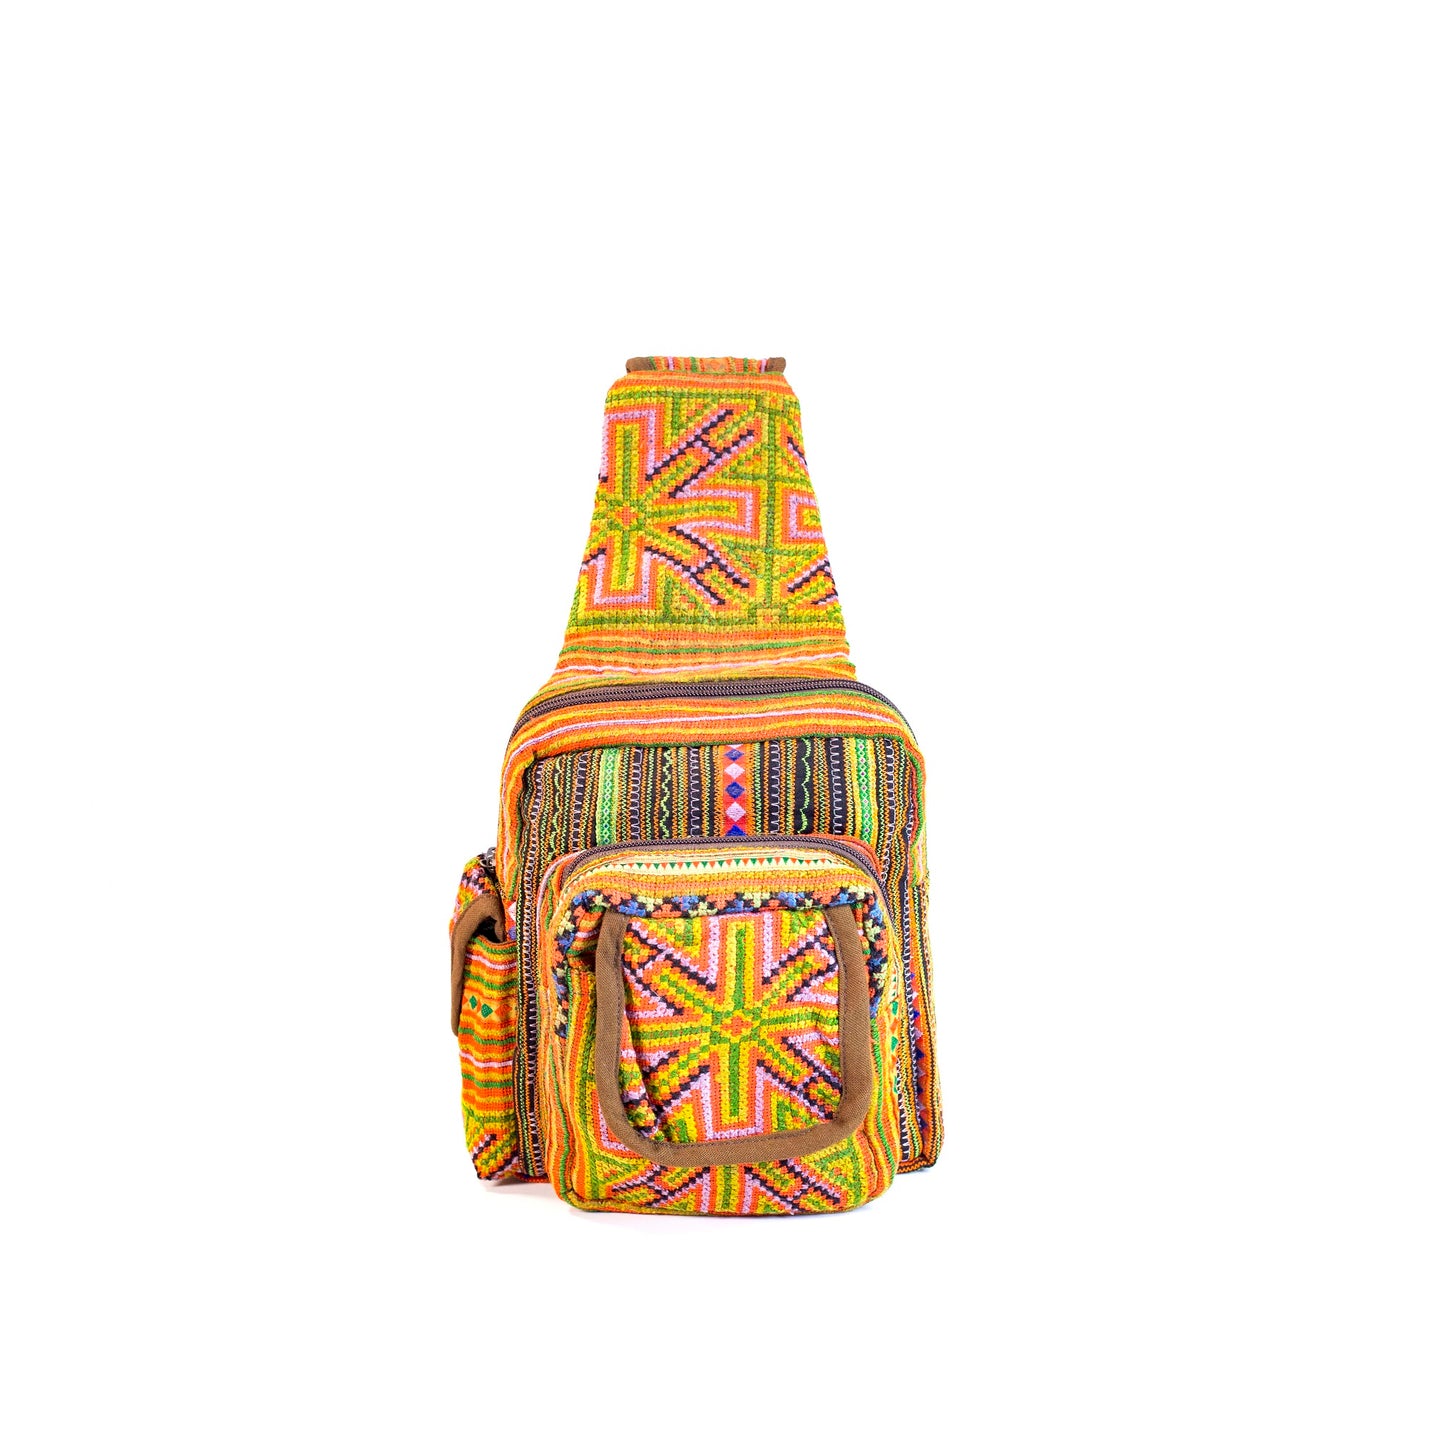 Boho-style linen, embroidery Sling bag, H'mong tribal pattern in ORANGE silk thread and brown rim